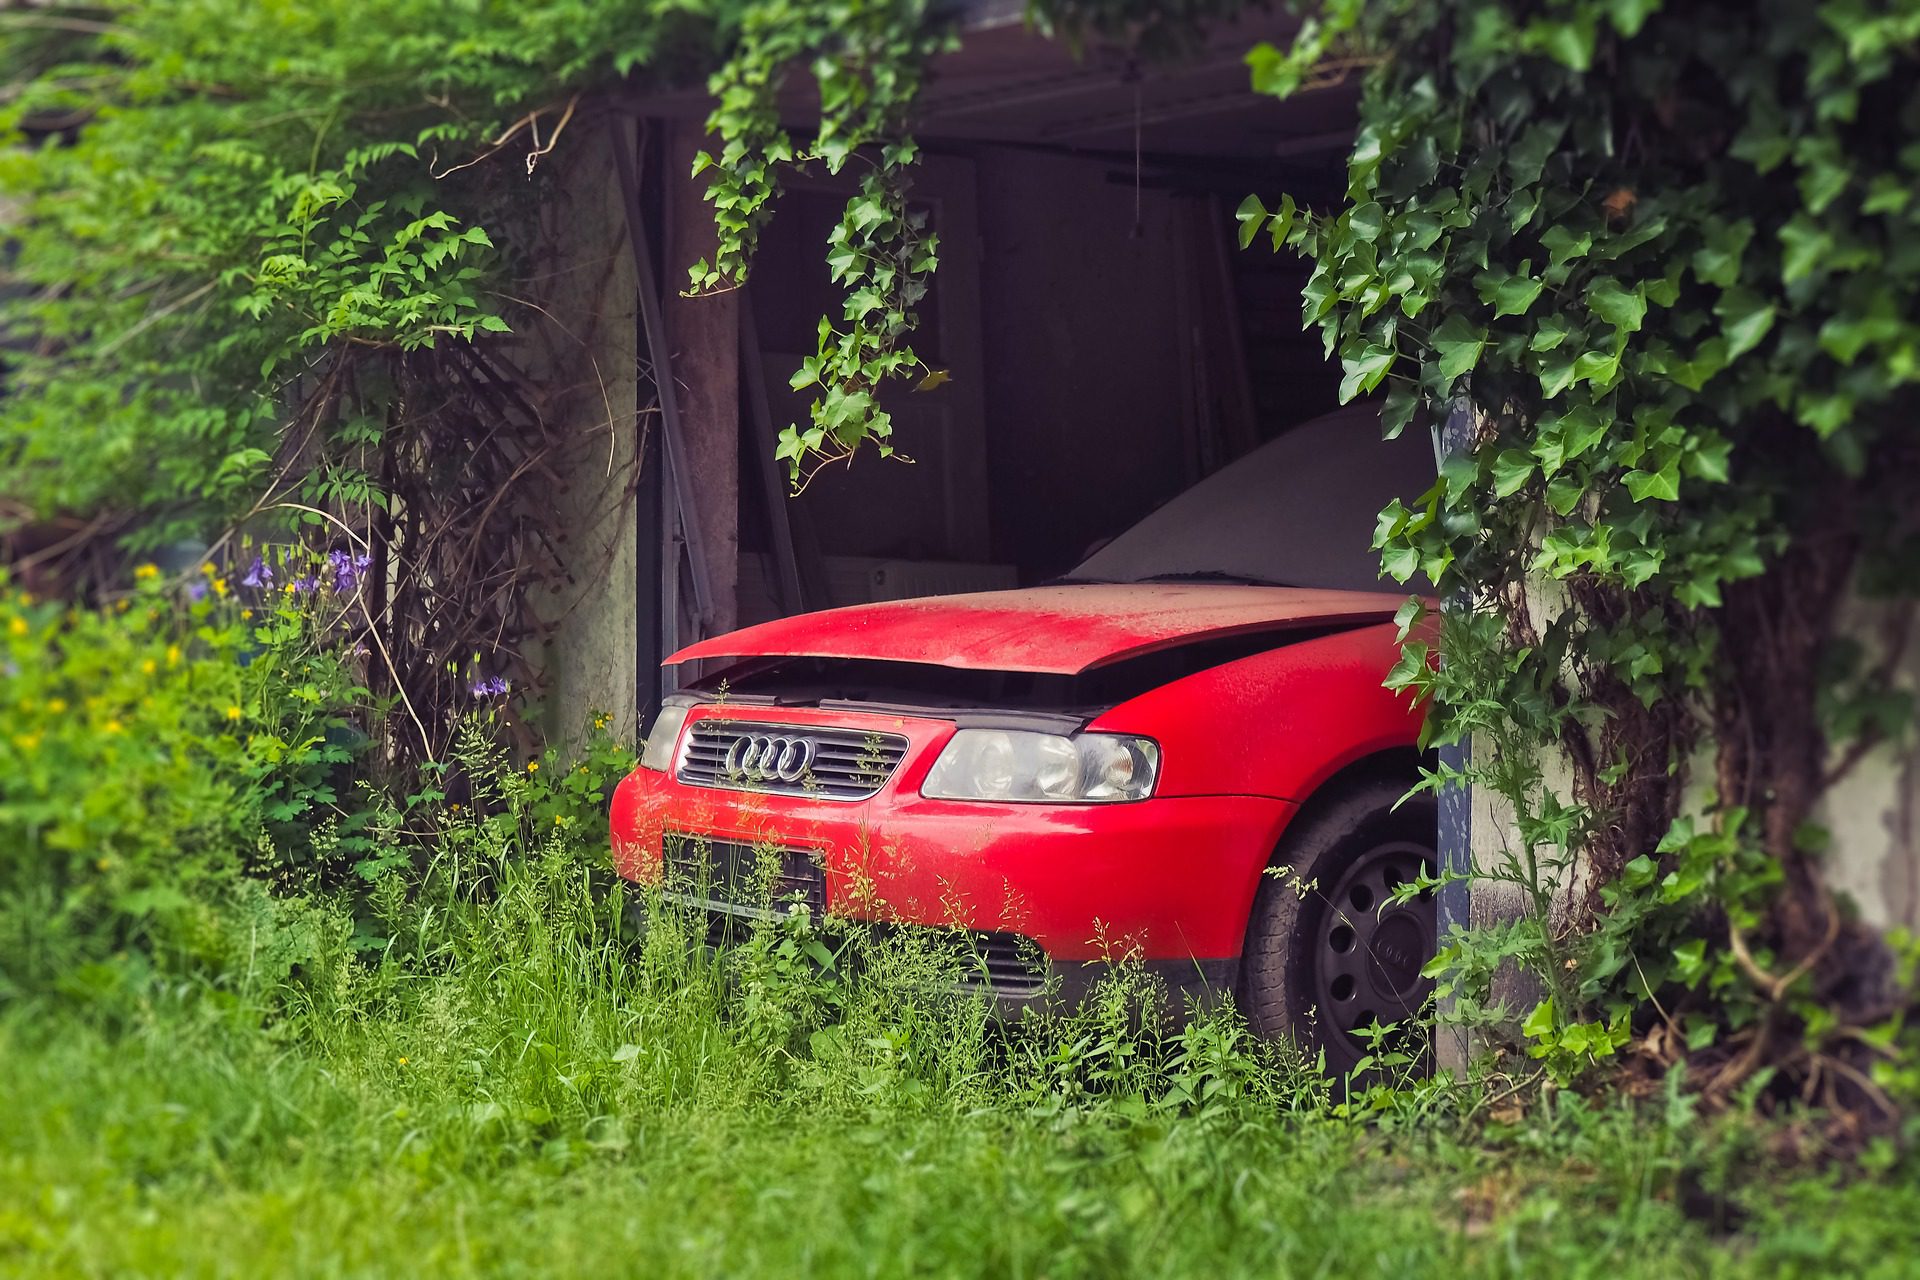 Abandoned red Audi car contributing to unfolding environmental disaster